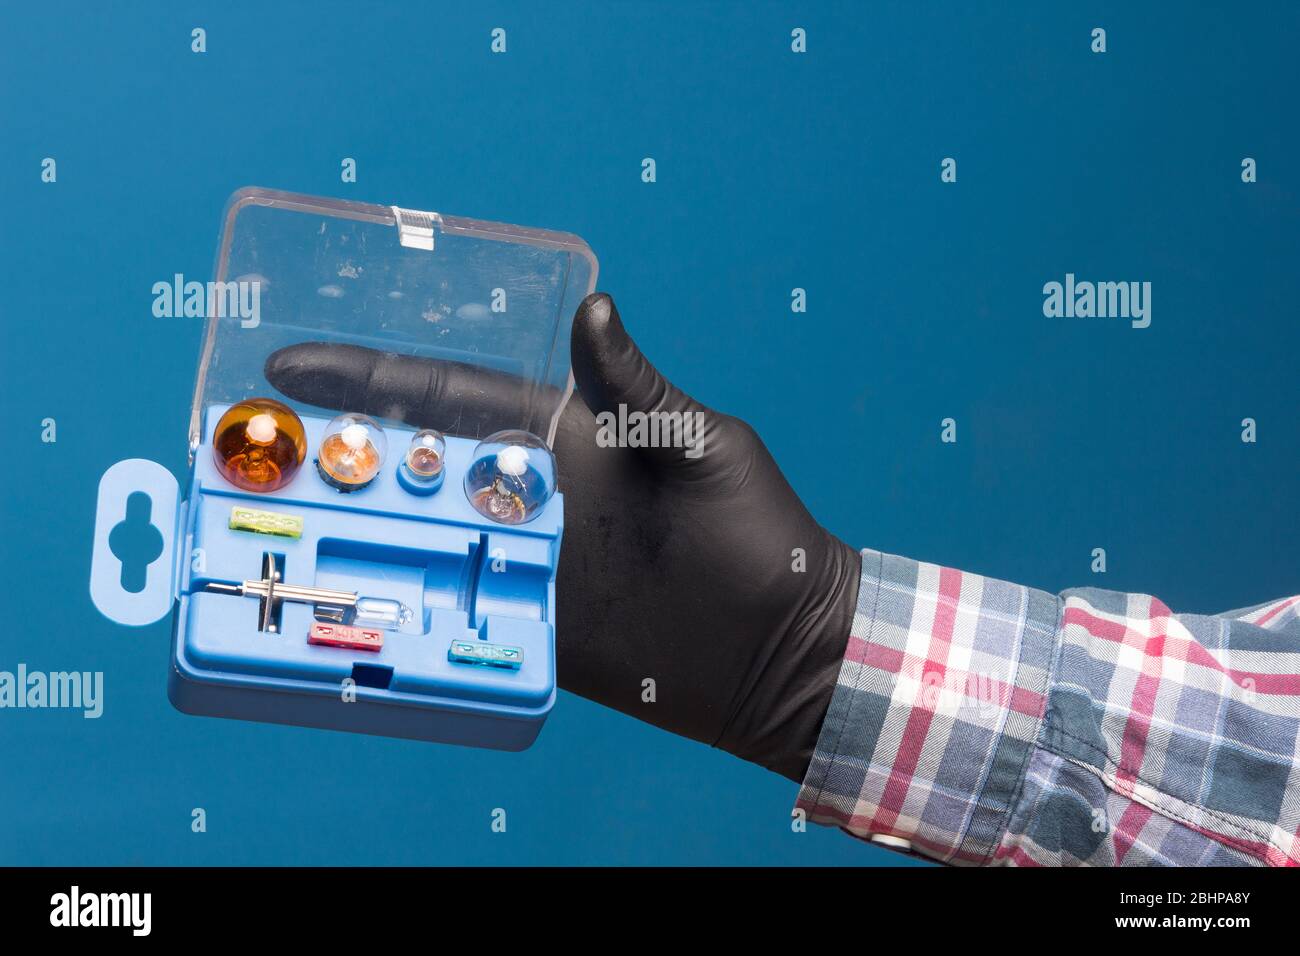 Lights and mandatory replacement material for cars in a plastic box and on hand with black glove and blue background Stock Photo